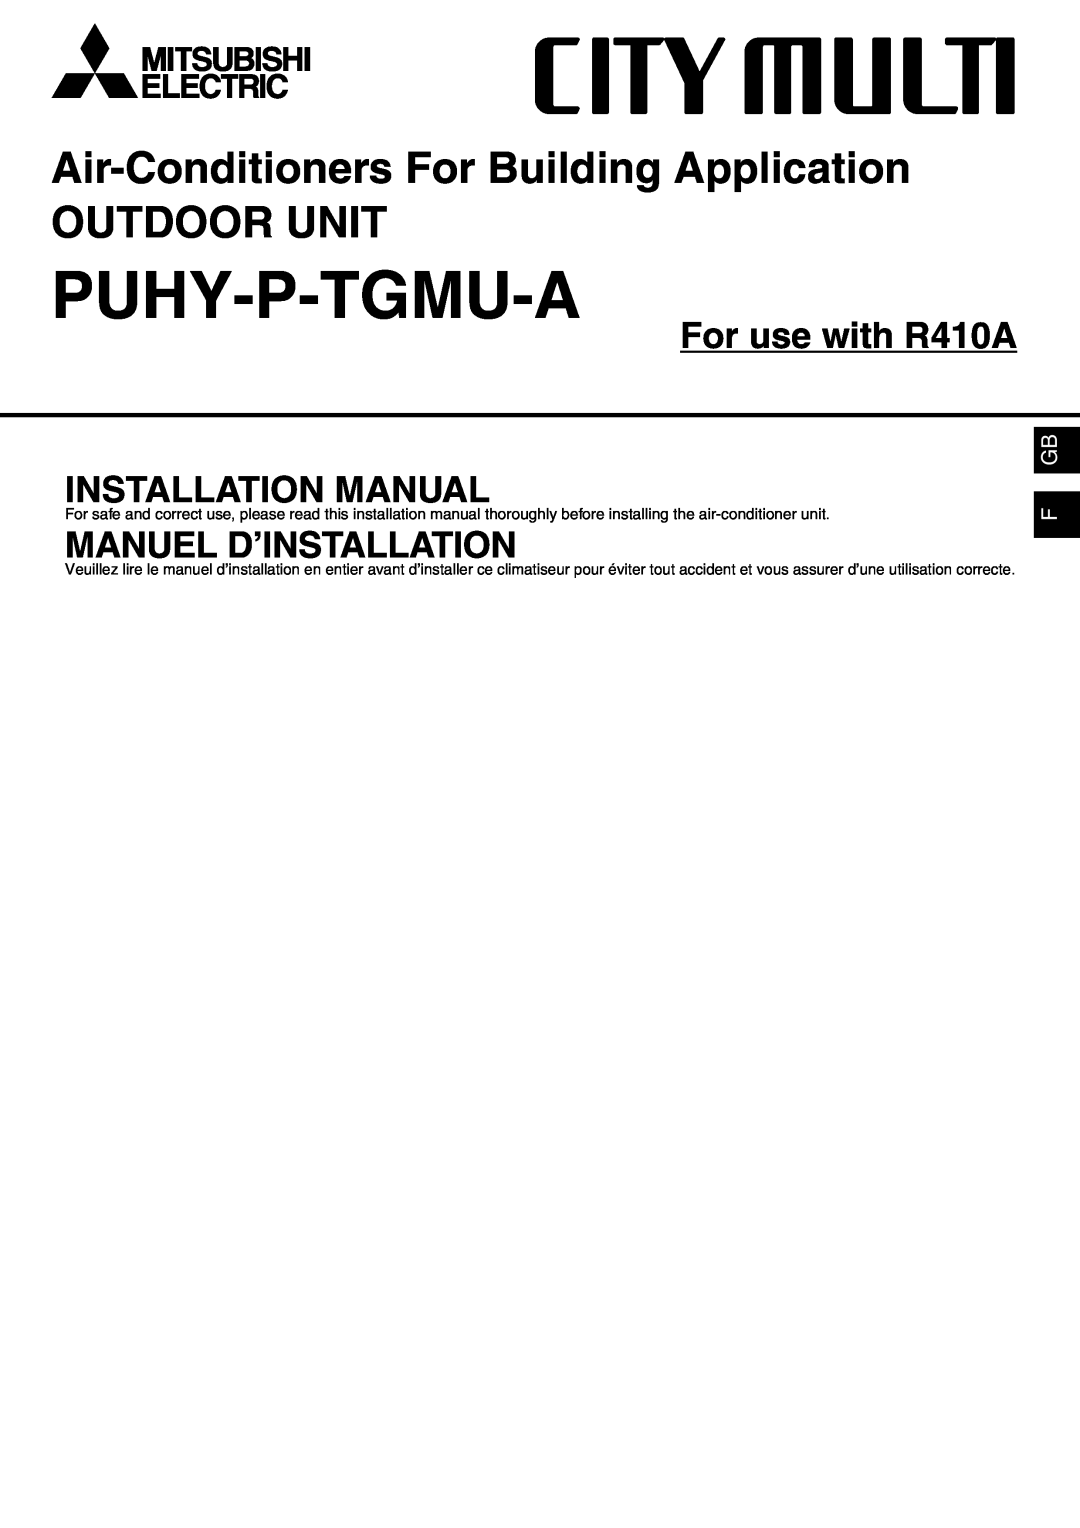 Mitsumi electronic PUHY-P-TGMU-A installation manual F Gb, Puhy-P-Tgmu-A, Air-ConditionersFor Building Application 